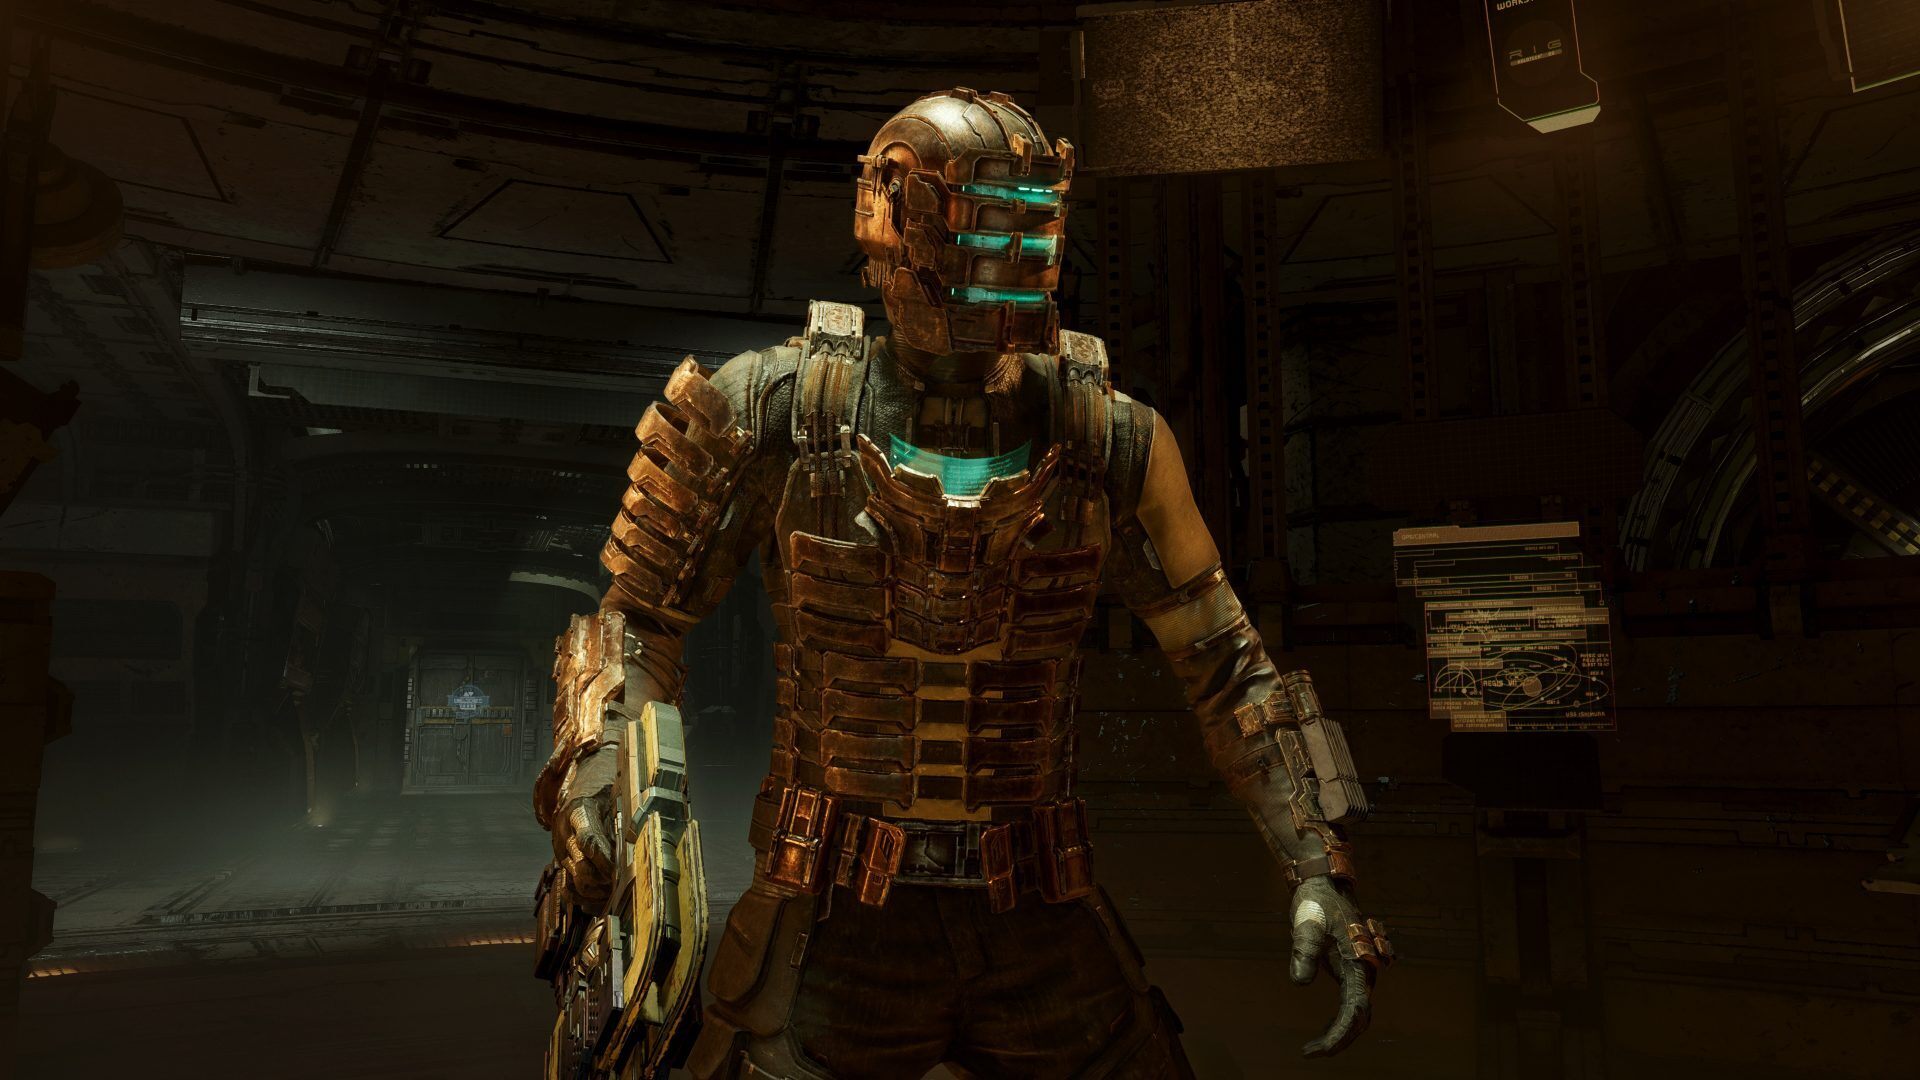 Dead Space Remake Review Round Up: Great Visuals, Smart Changes